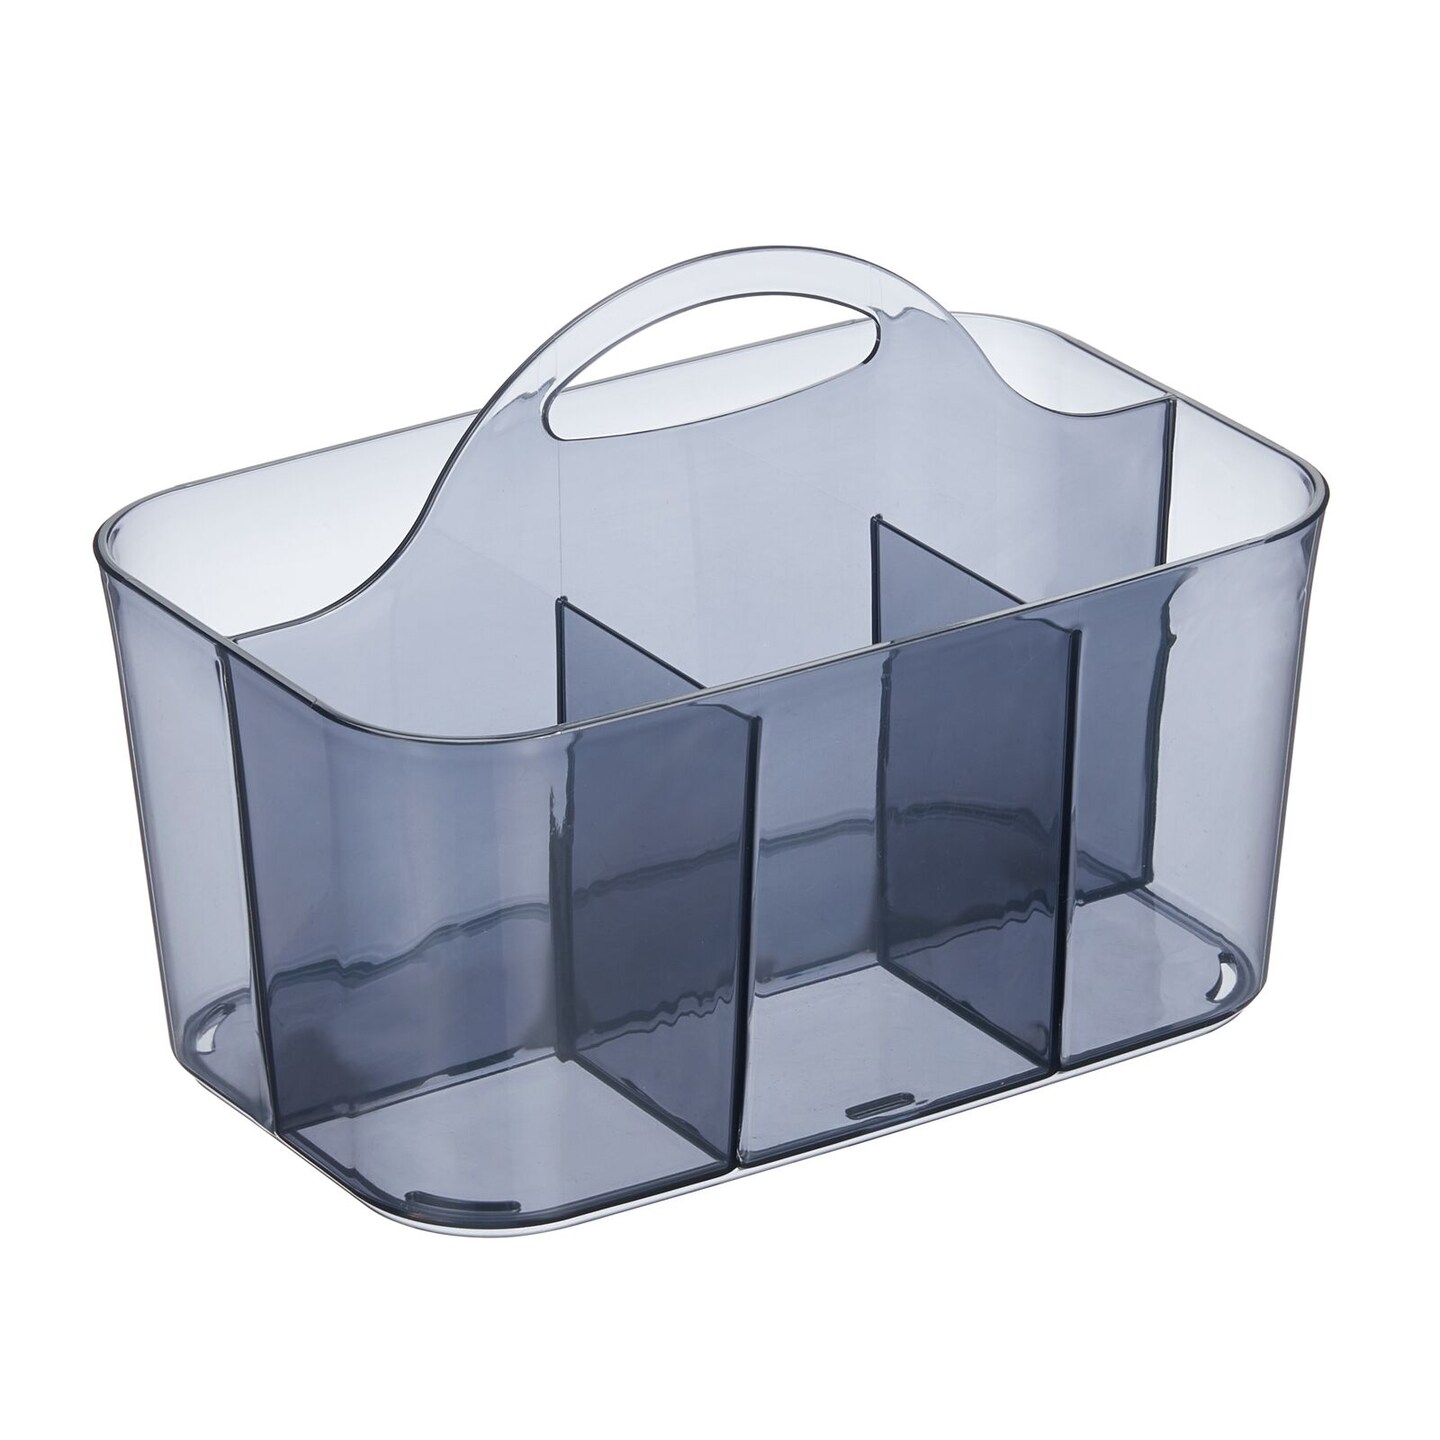 mDesign Plastic Divided Portable Shower Caddy Storage Organizer - Clear /Natural